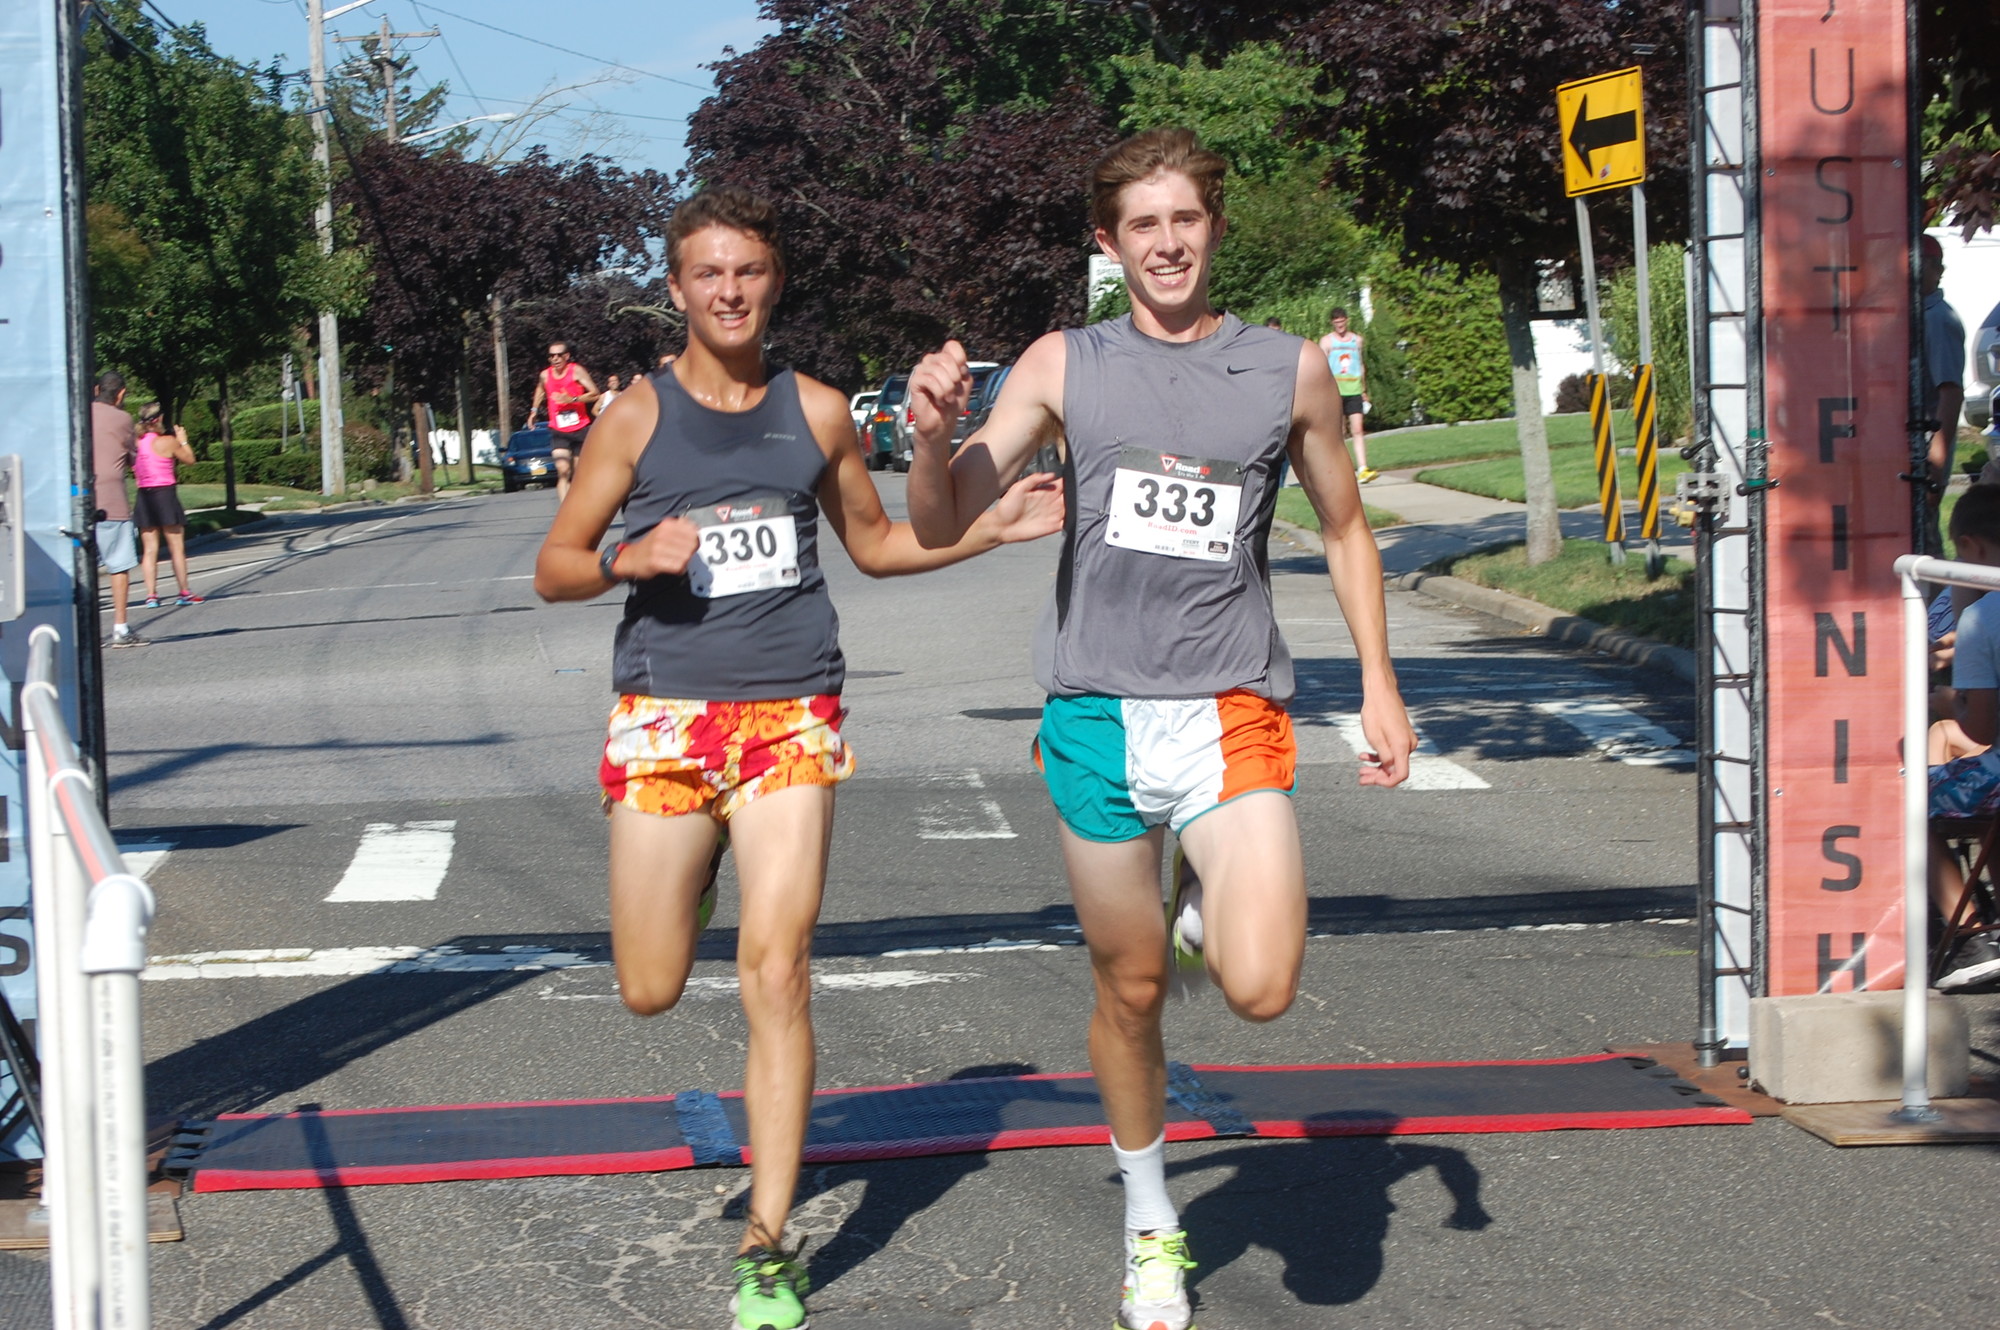 Wantagh track teammates Max Moritz, left, and James McVeigh crossed the finish line a hair apart at the Purple Ribbon Run on July 25.